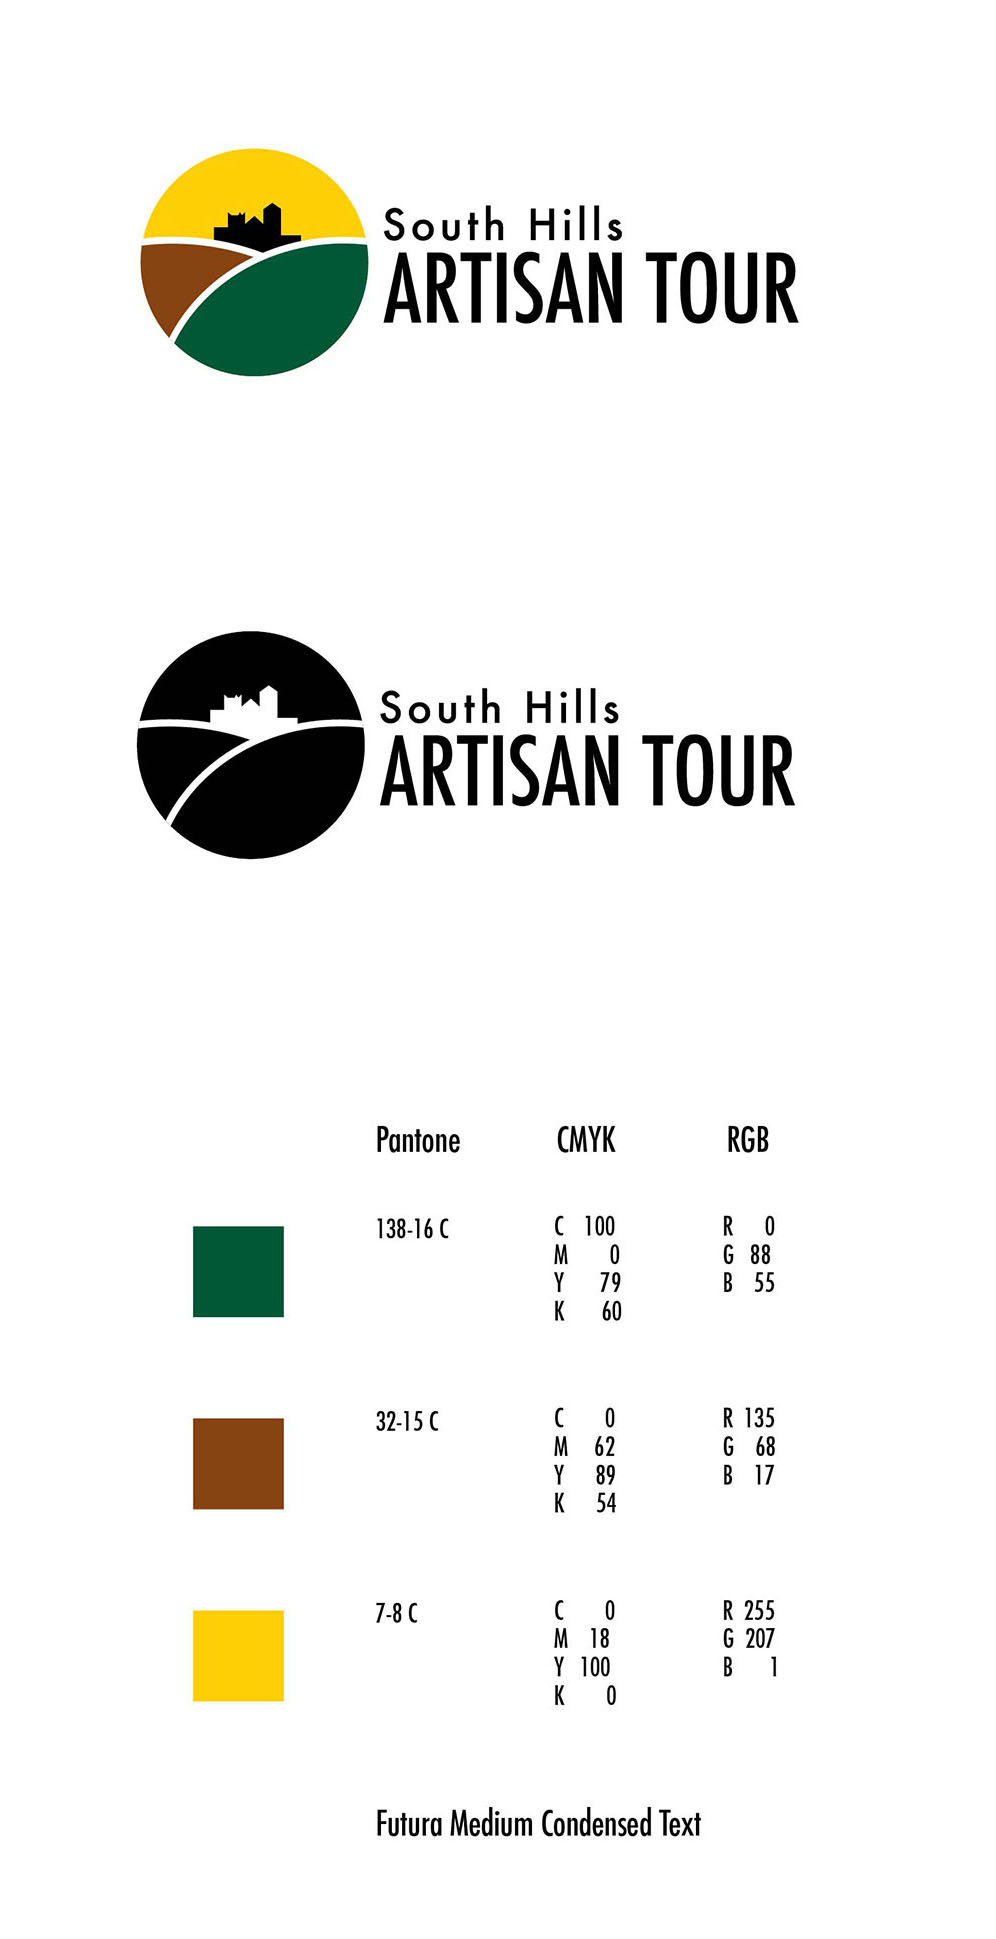 brand use guidelines for South Hills Artisan Tour, including both logo versions, color swatches, and font selections